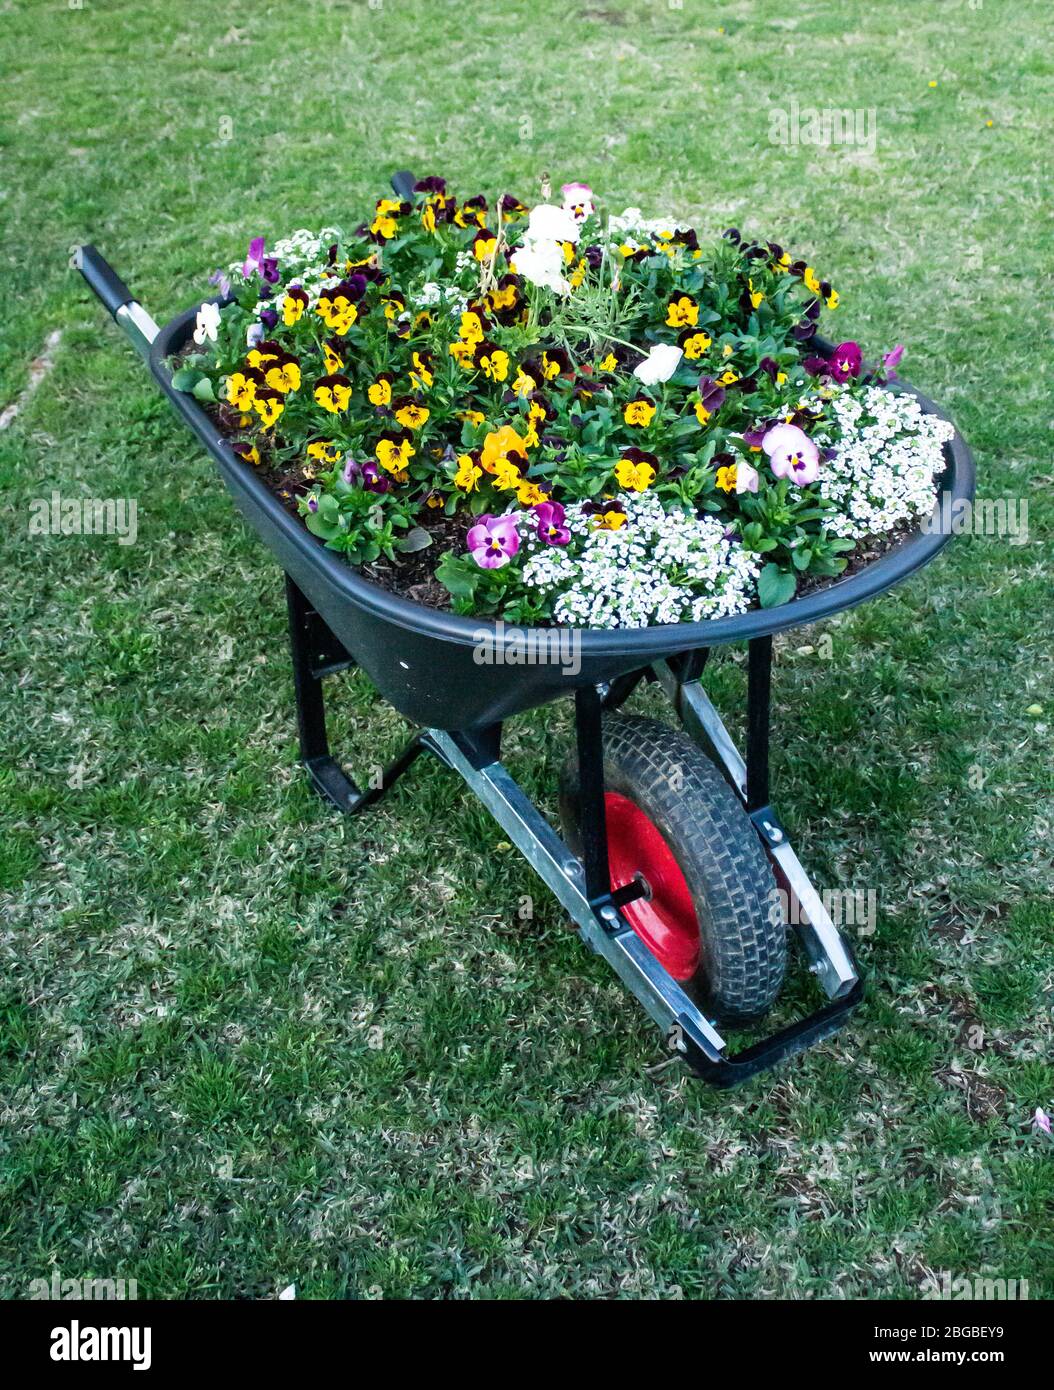 Garden wheelbarrow filled with flowering pansies set on green grass lawn Stock Photo